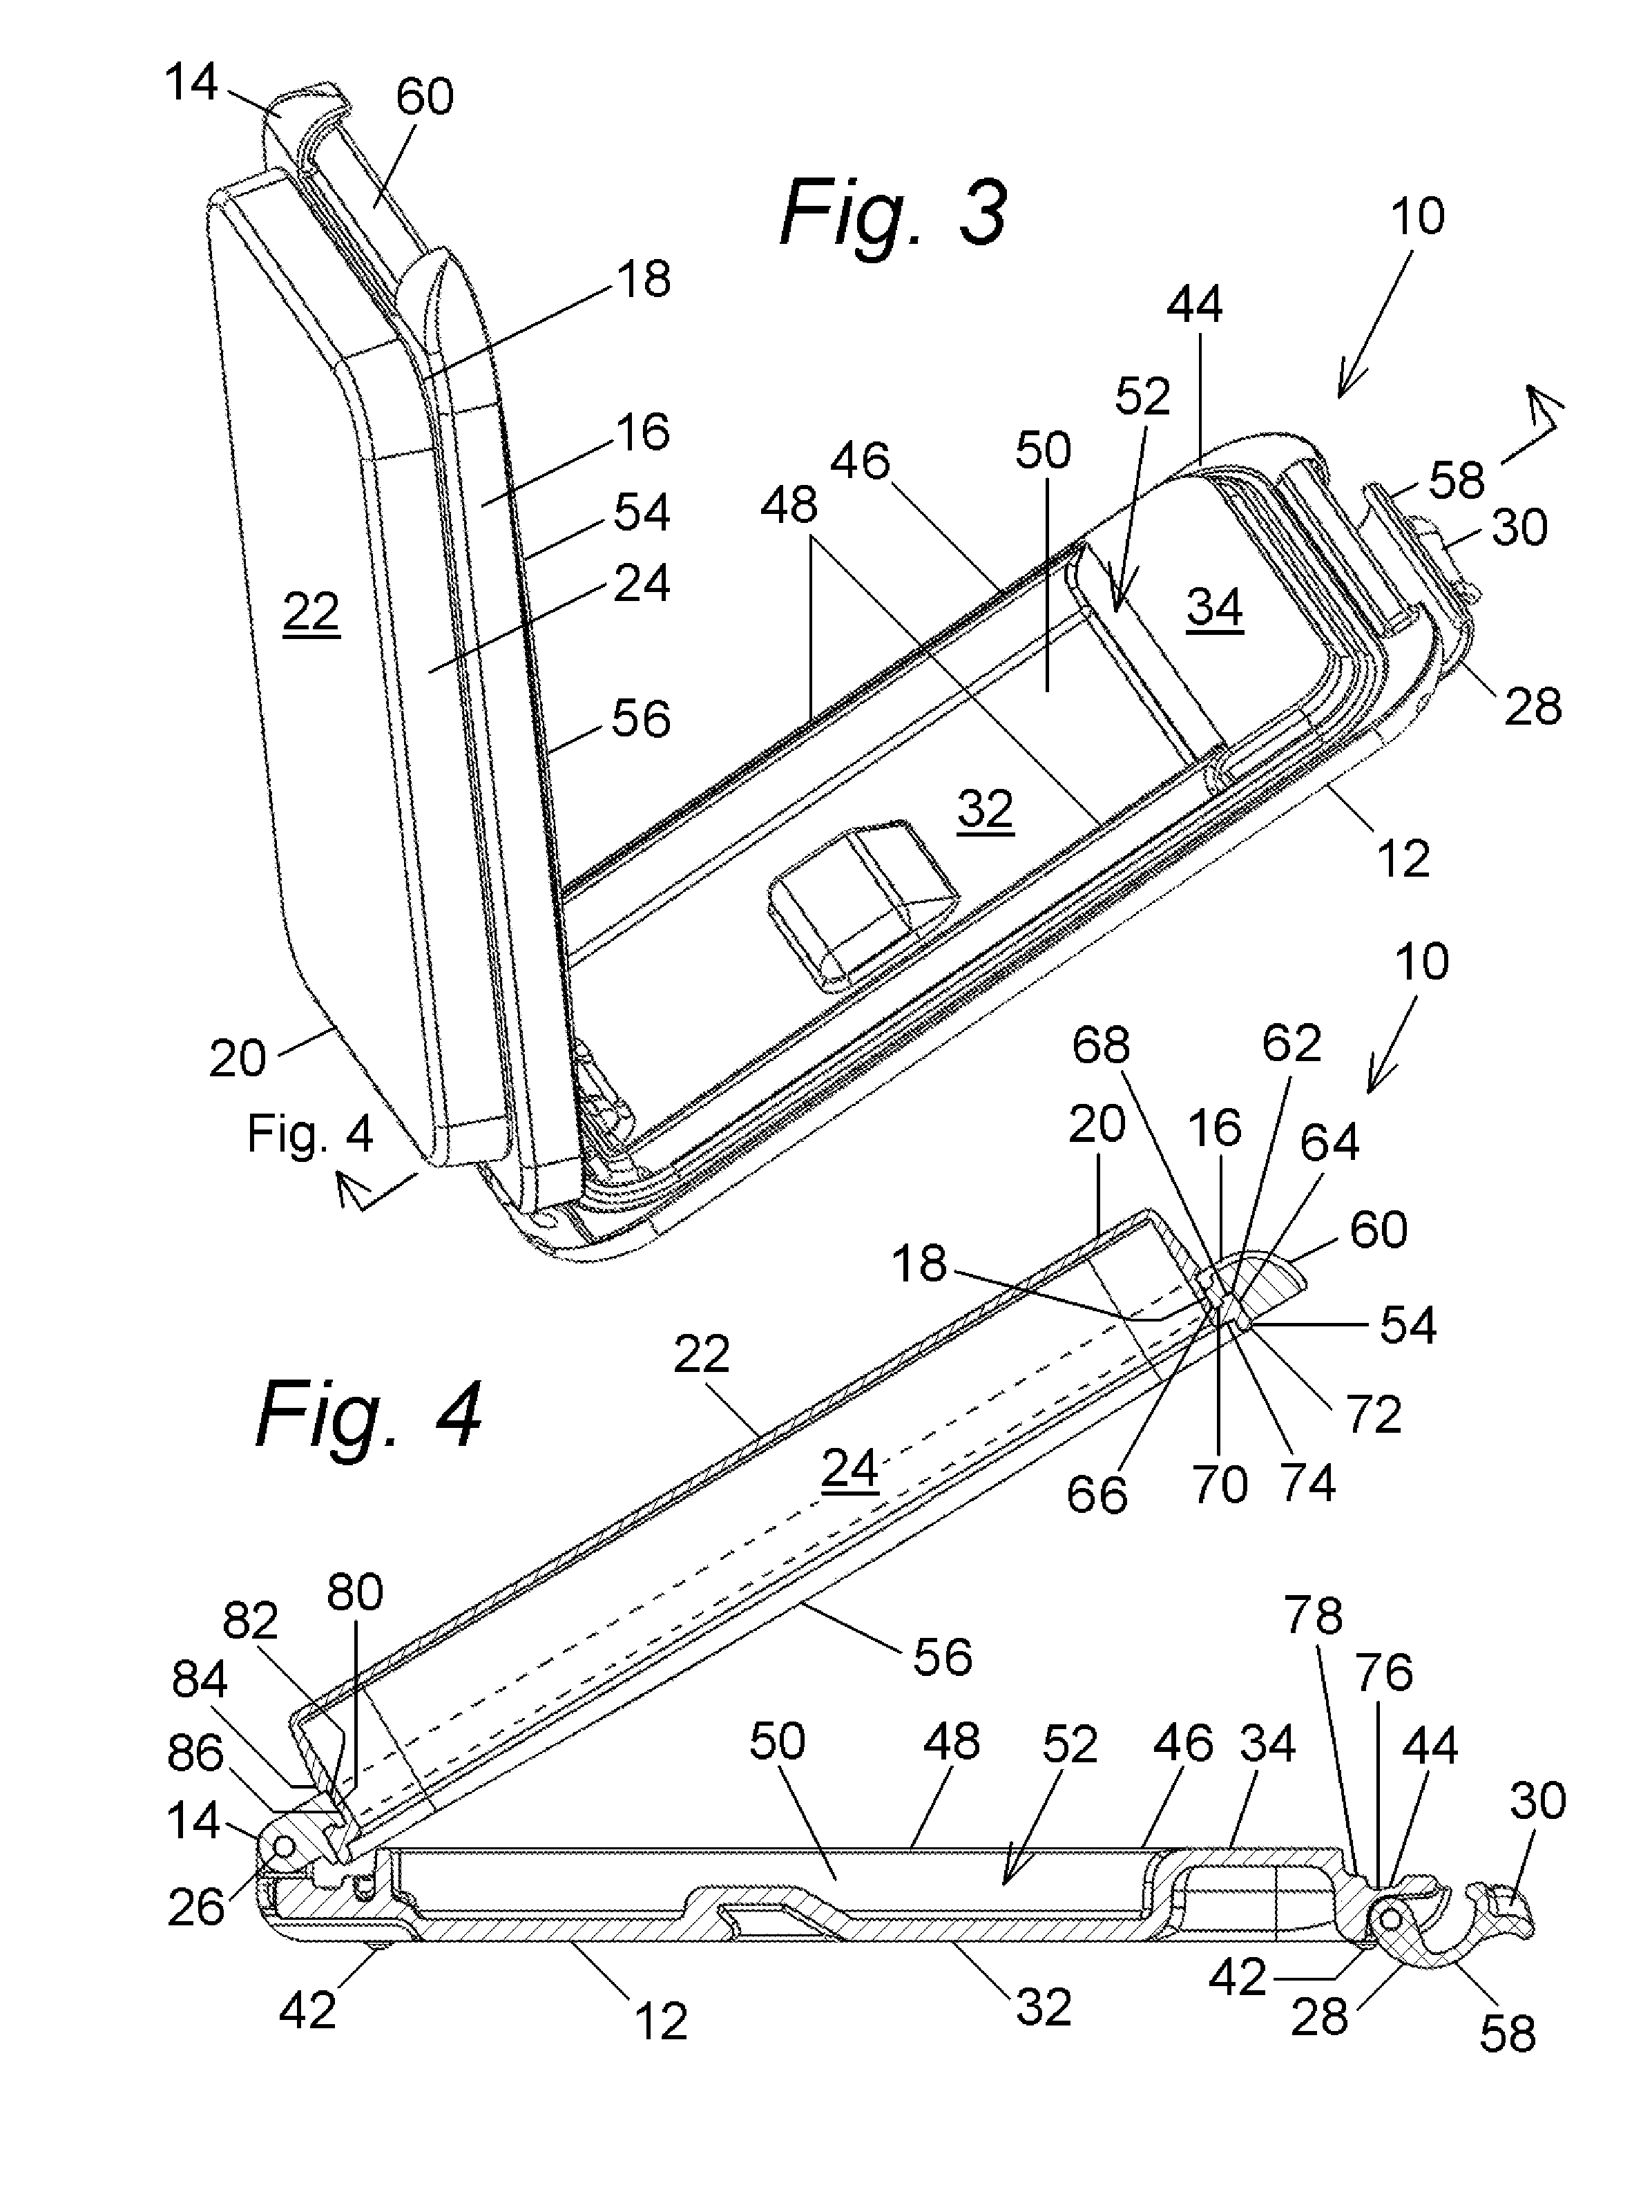 Protective enclosure for touch screen device